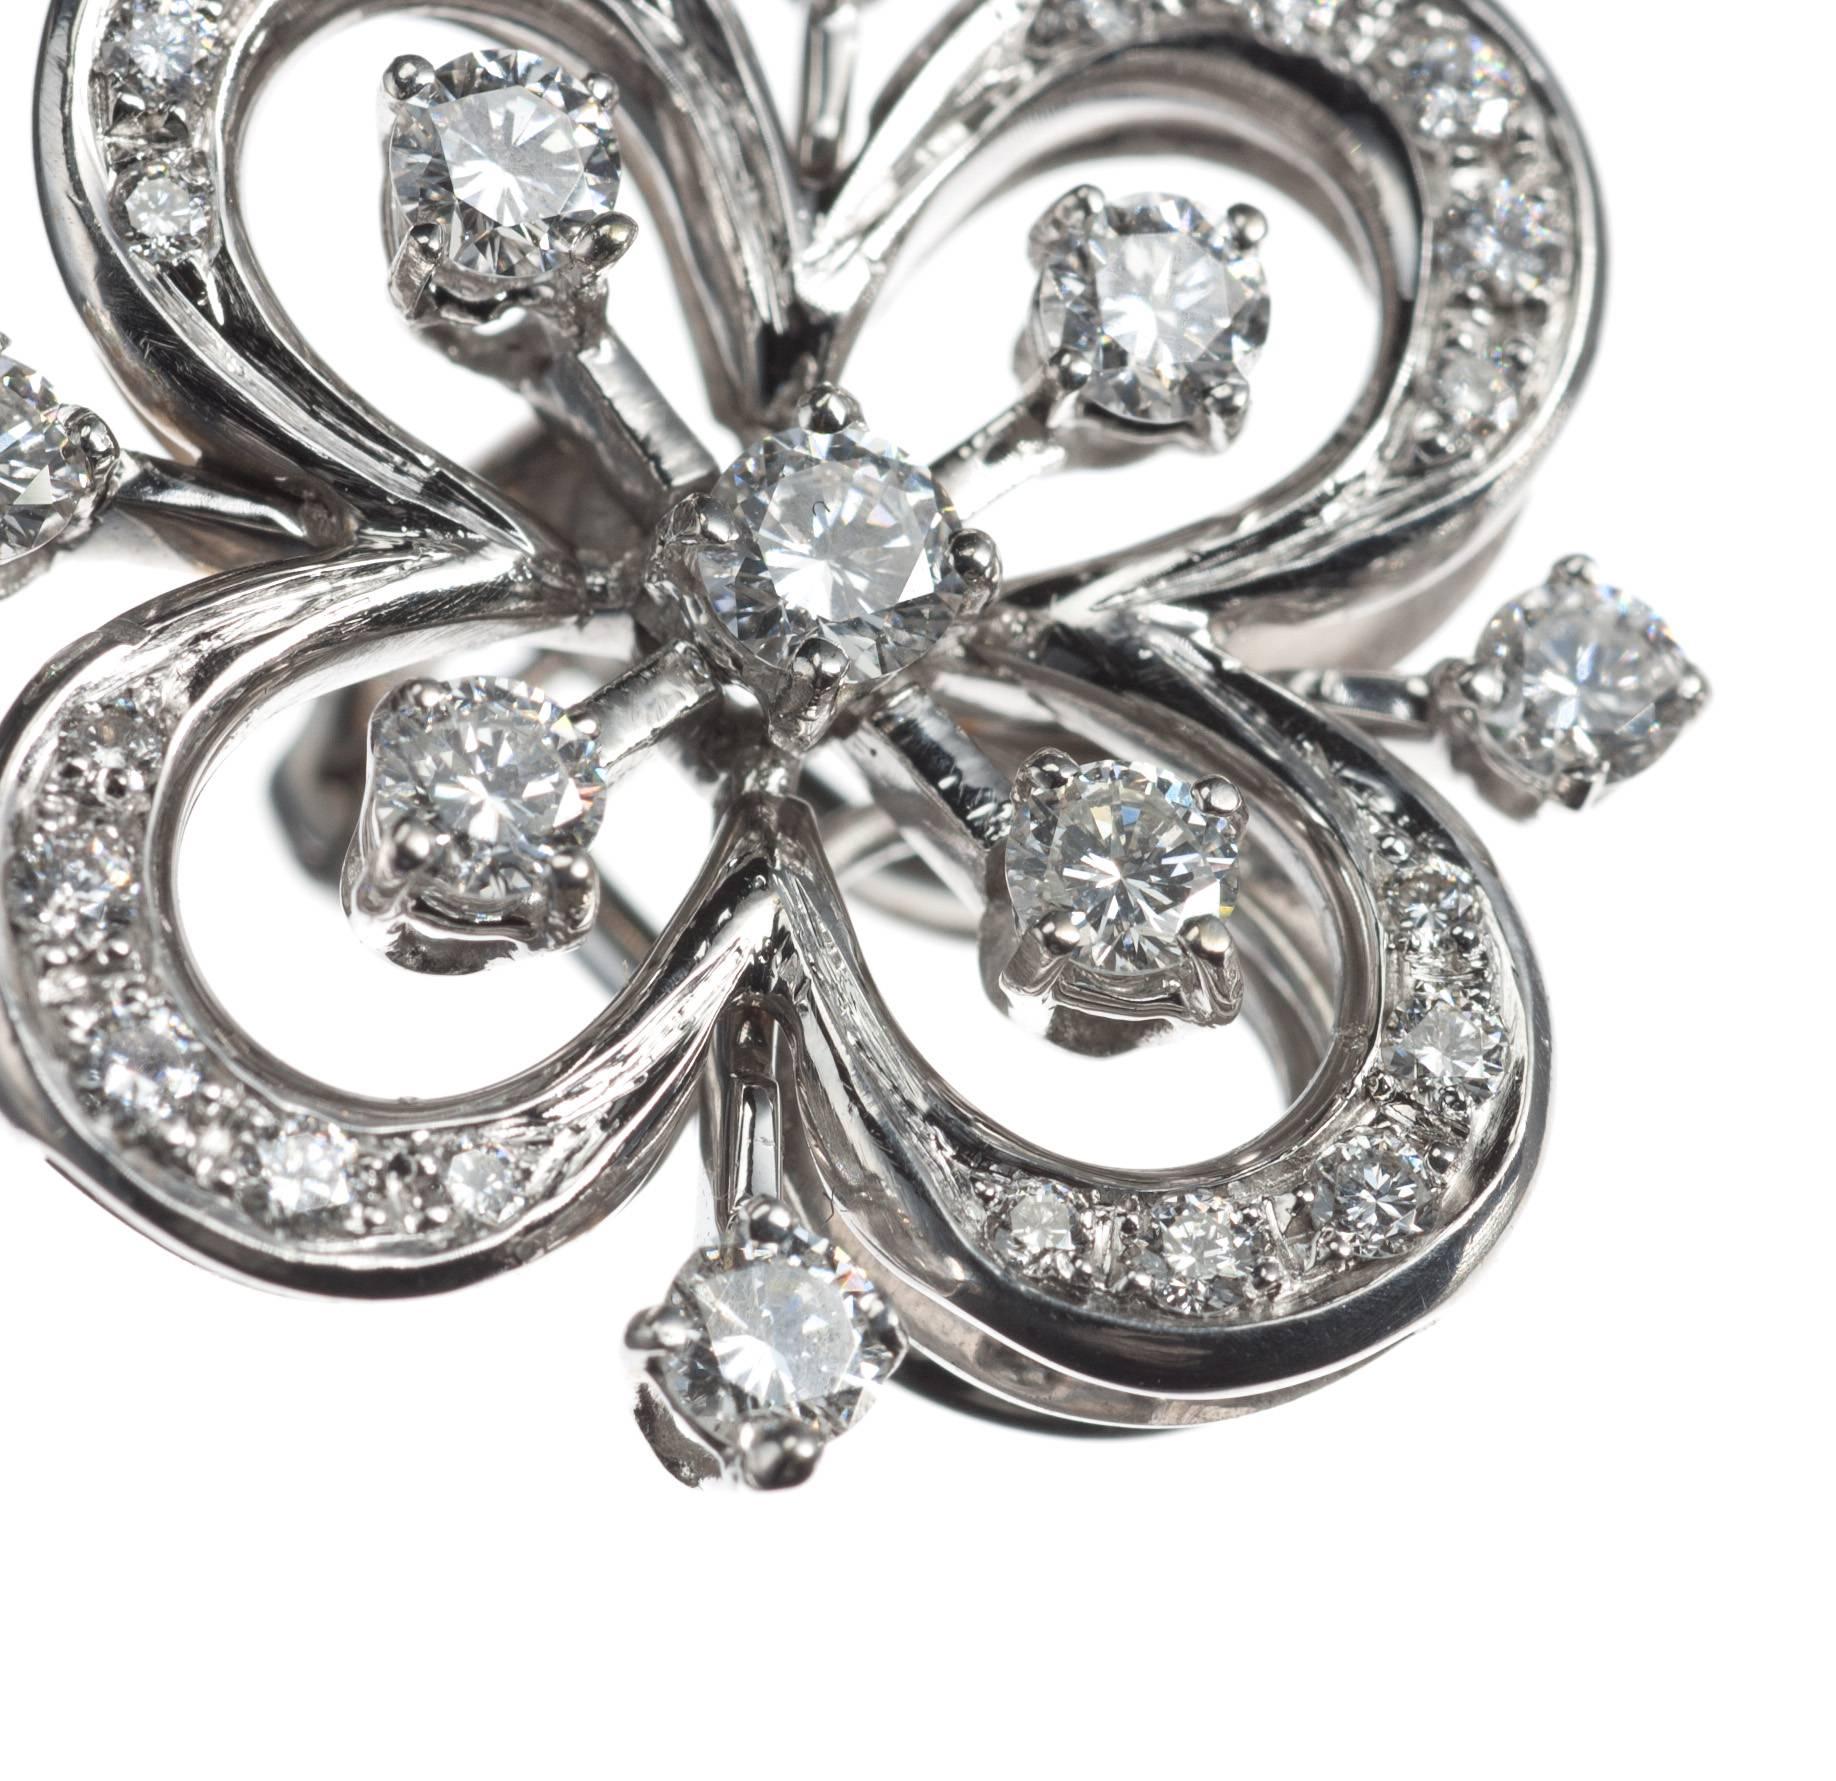 A pair of quatrefoil floral earrings, from Italian design Barzizza is fashioned in 18-karat white gold and set with 58 round brilliant-cut diamonds, 1.78ctw. of G-H color and VVS1-VVS2 clarity. Secured with omega clip backs. These earrings offer a